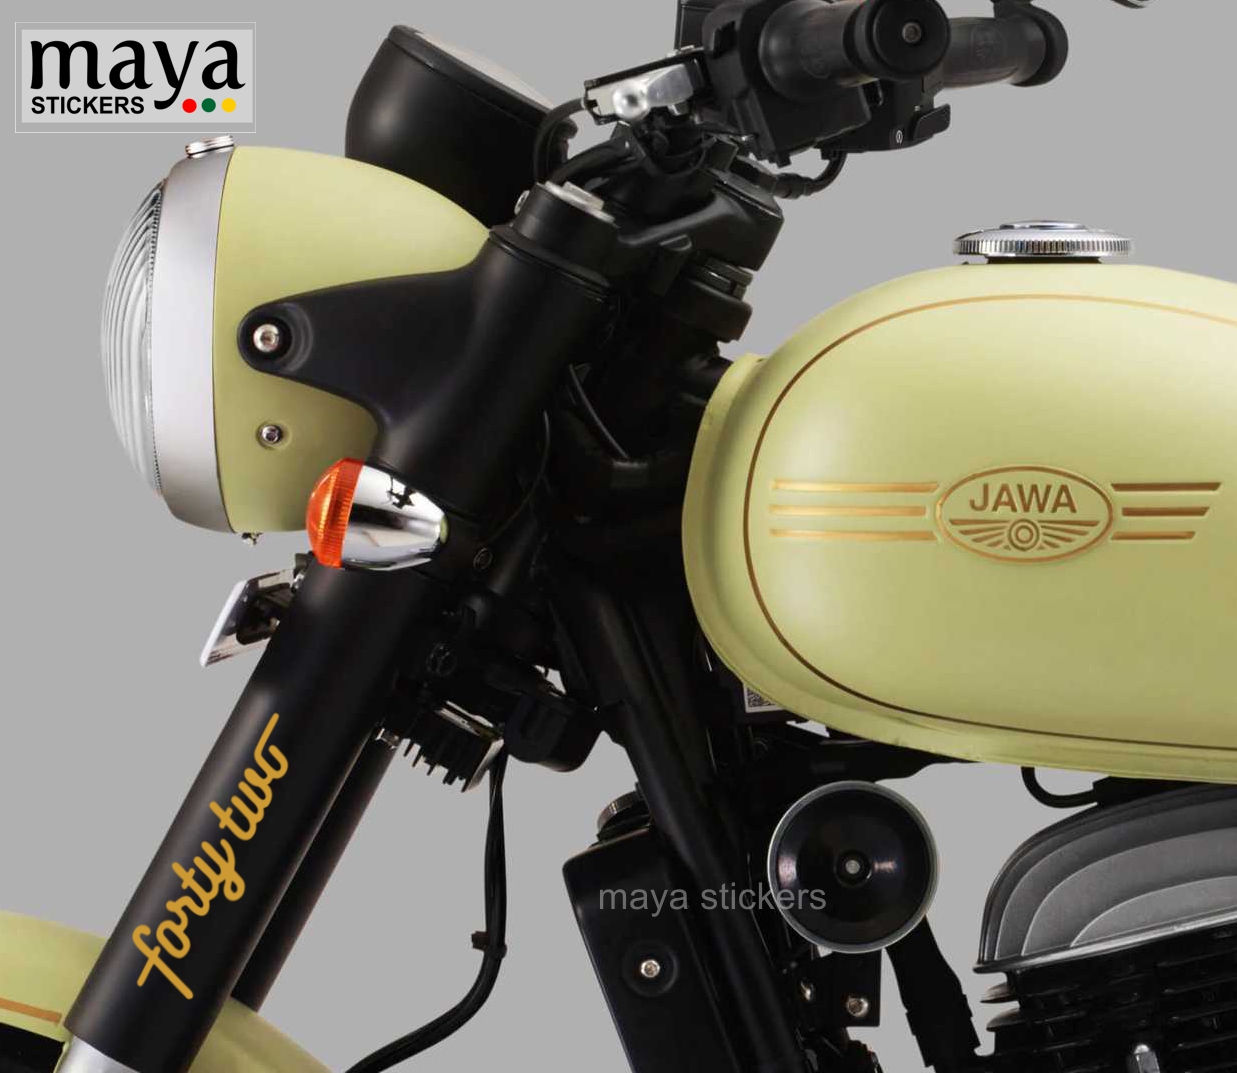  Jawa  42 logo sticker  in custom colors and sizes